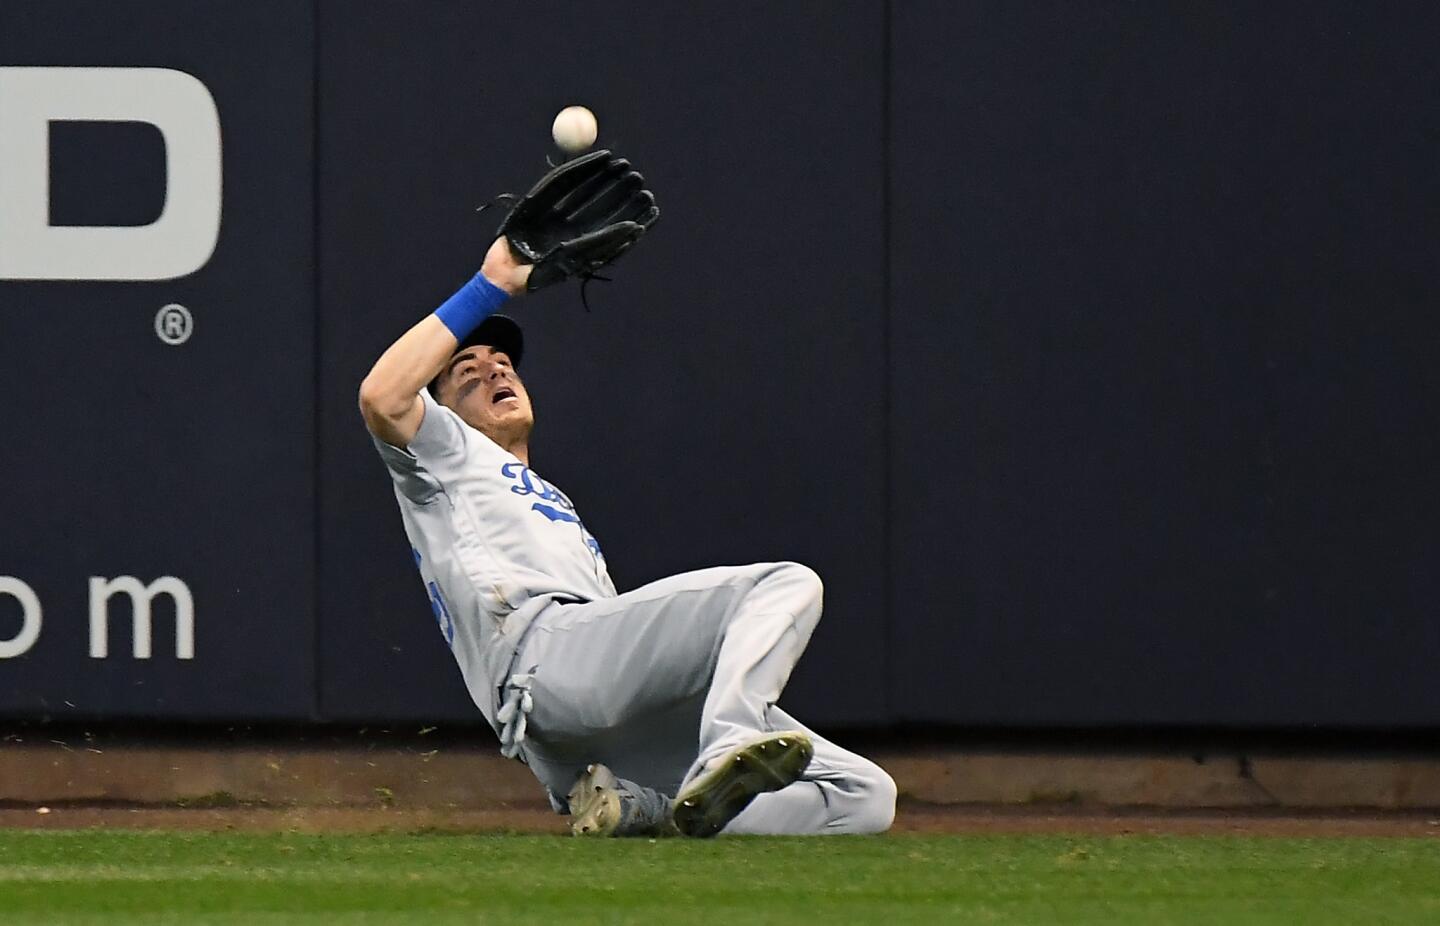 Dodgers Cody Bellinger makes a sliding catch off the bat of Brewers Ryan Braun in the 8th inning.